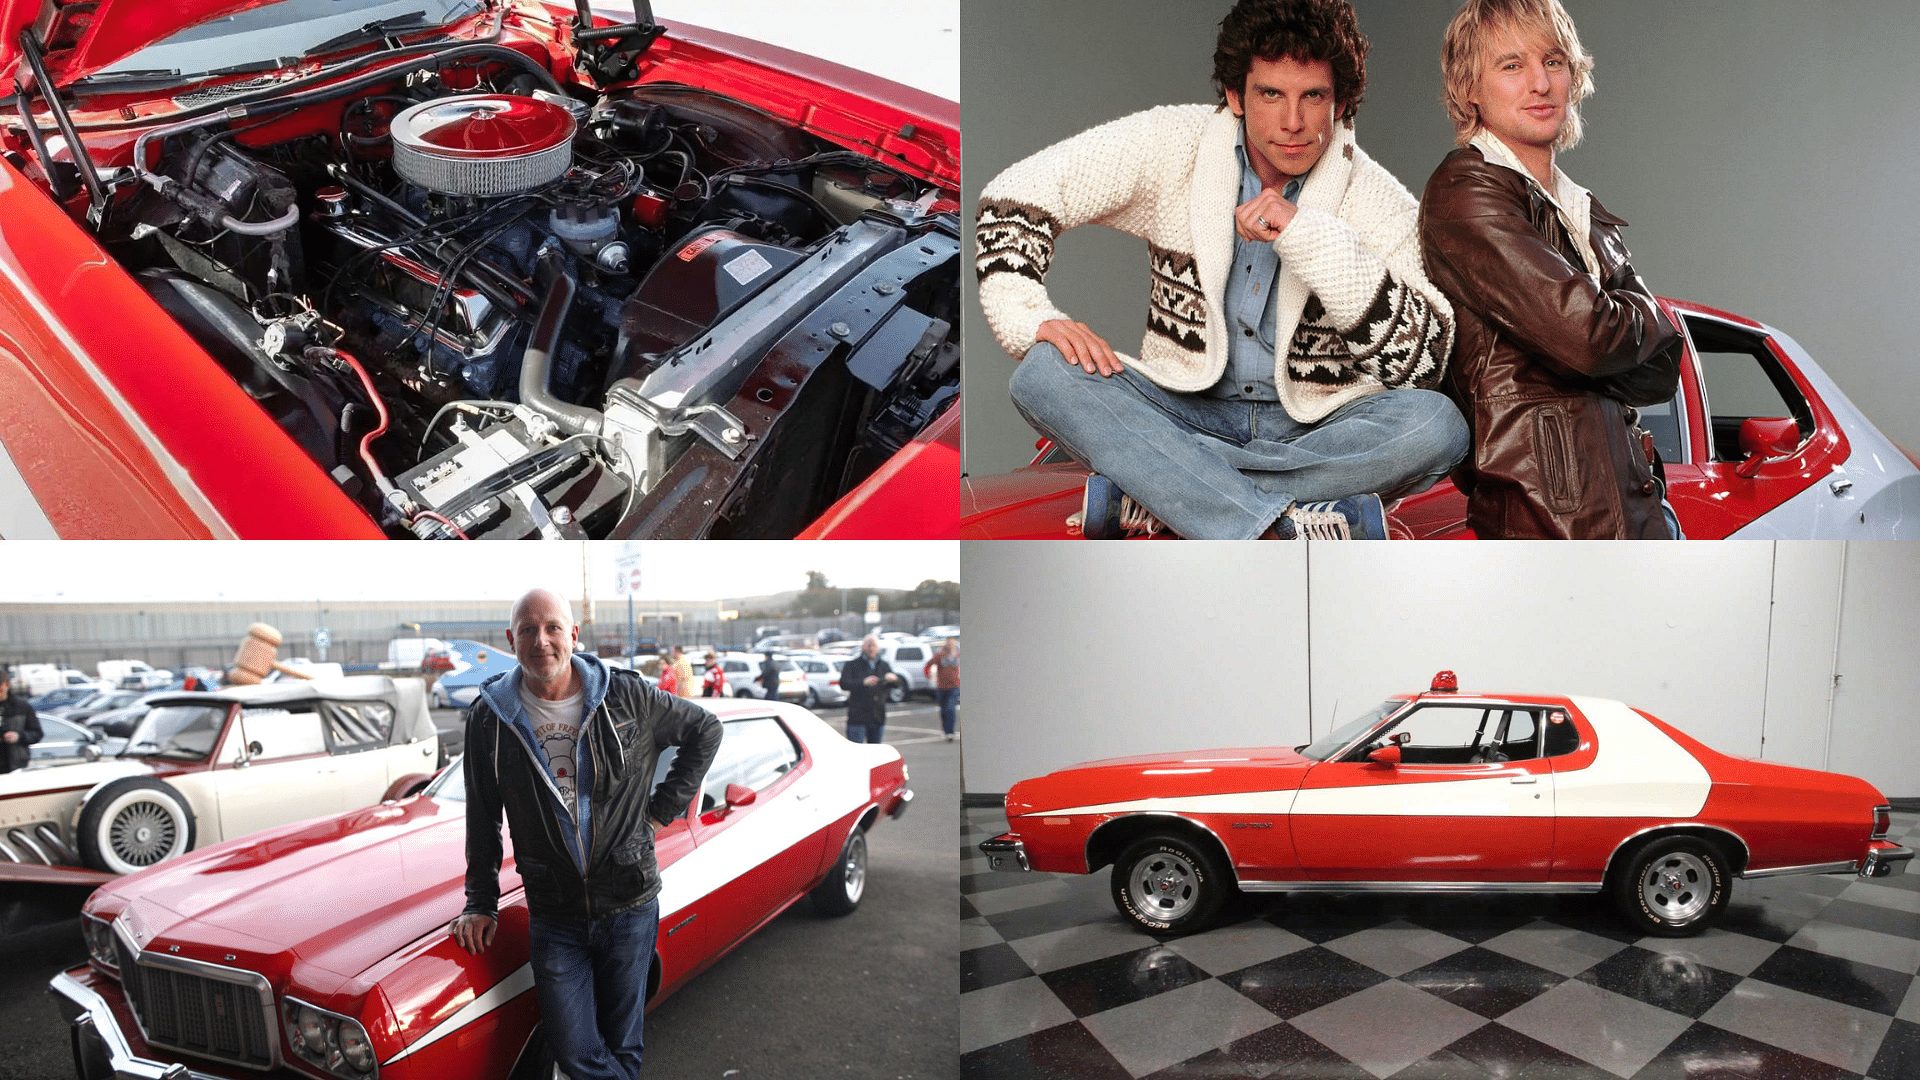 Original Ford Torino from the show - engine, Starsky & Hutch